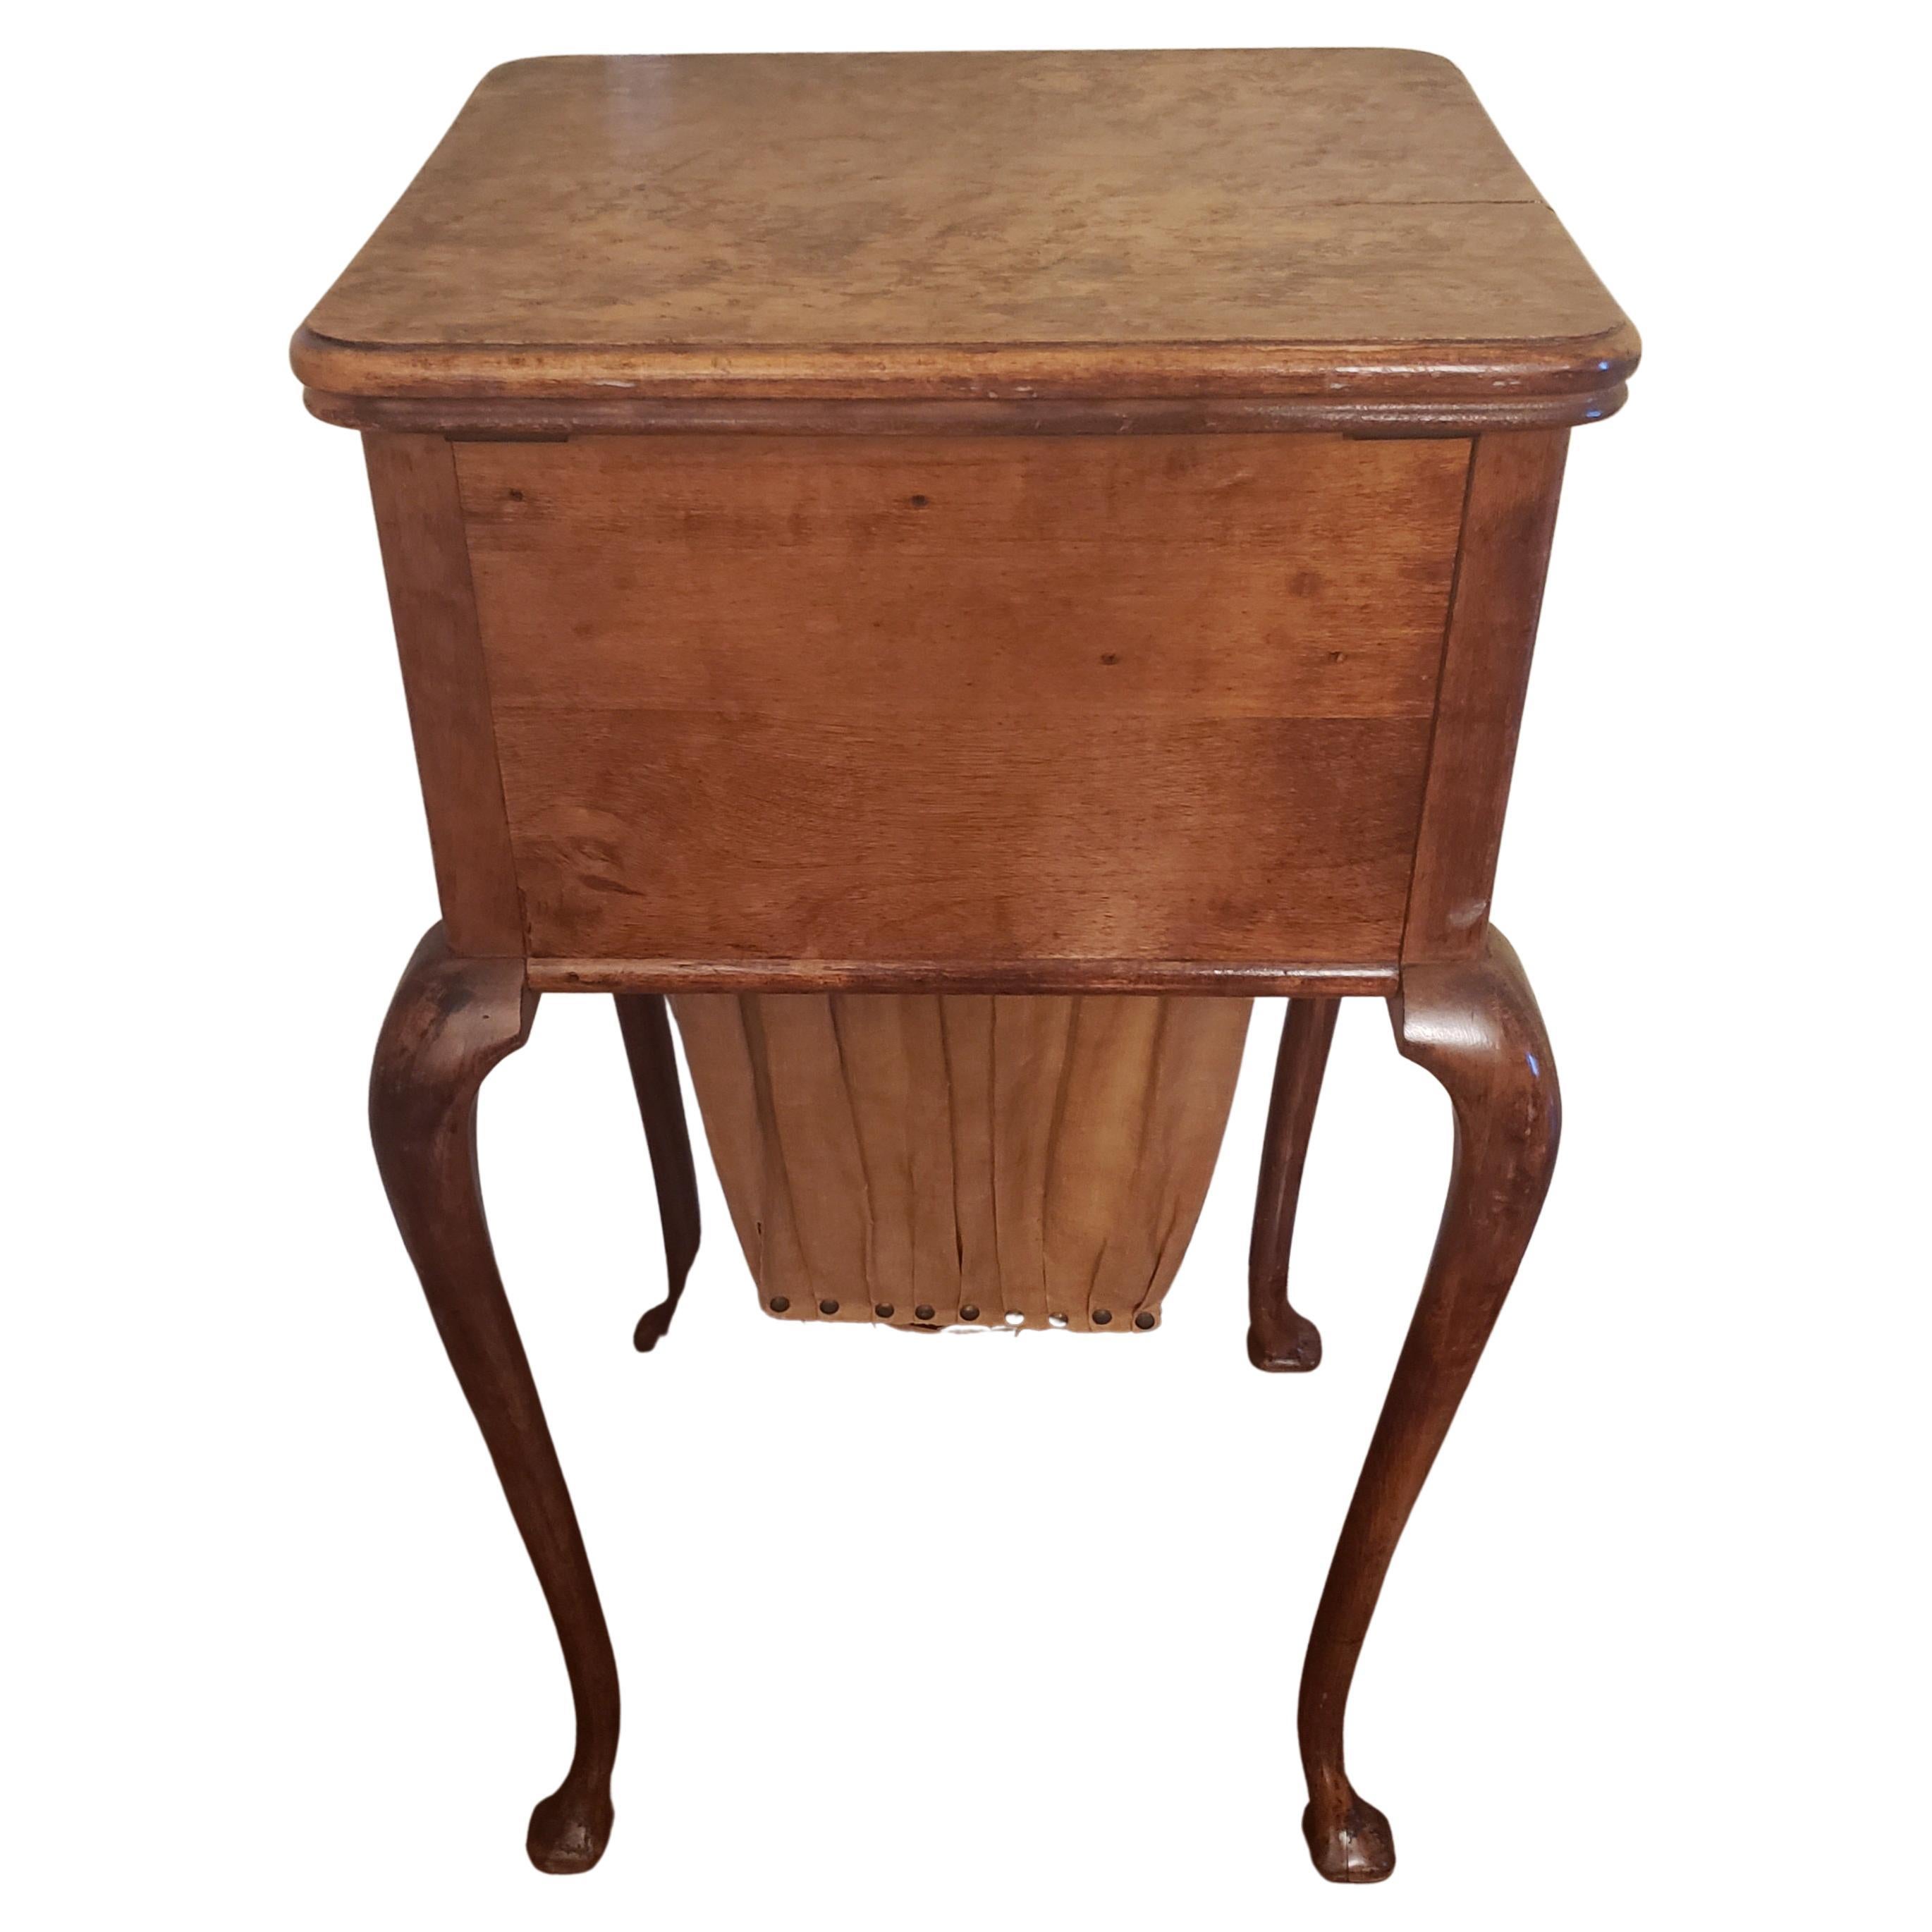 This a vintage English sewing table with its original scrap bag and finish. This table comes with a deep dovetail right side drawer. Top opens to reveal a storage area divided with a compartmental tray . Tray is removable. Open top also reveals a